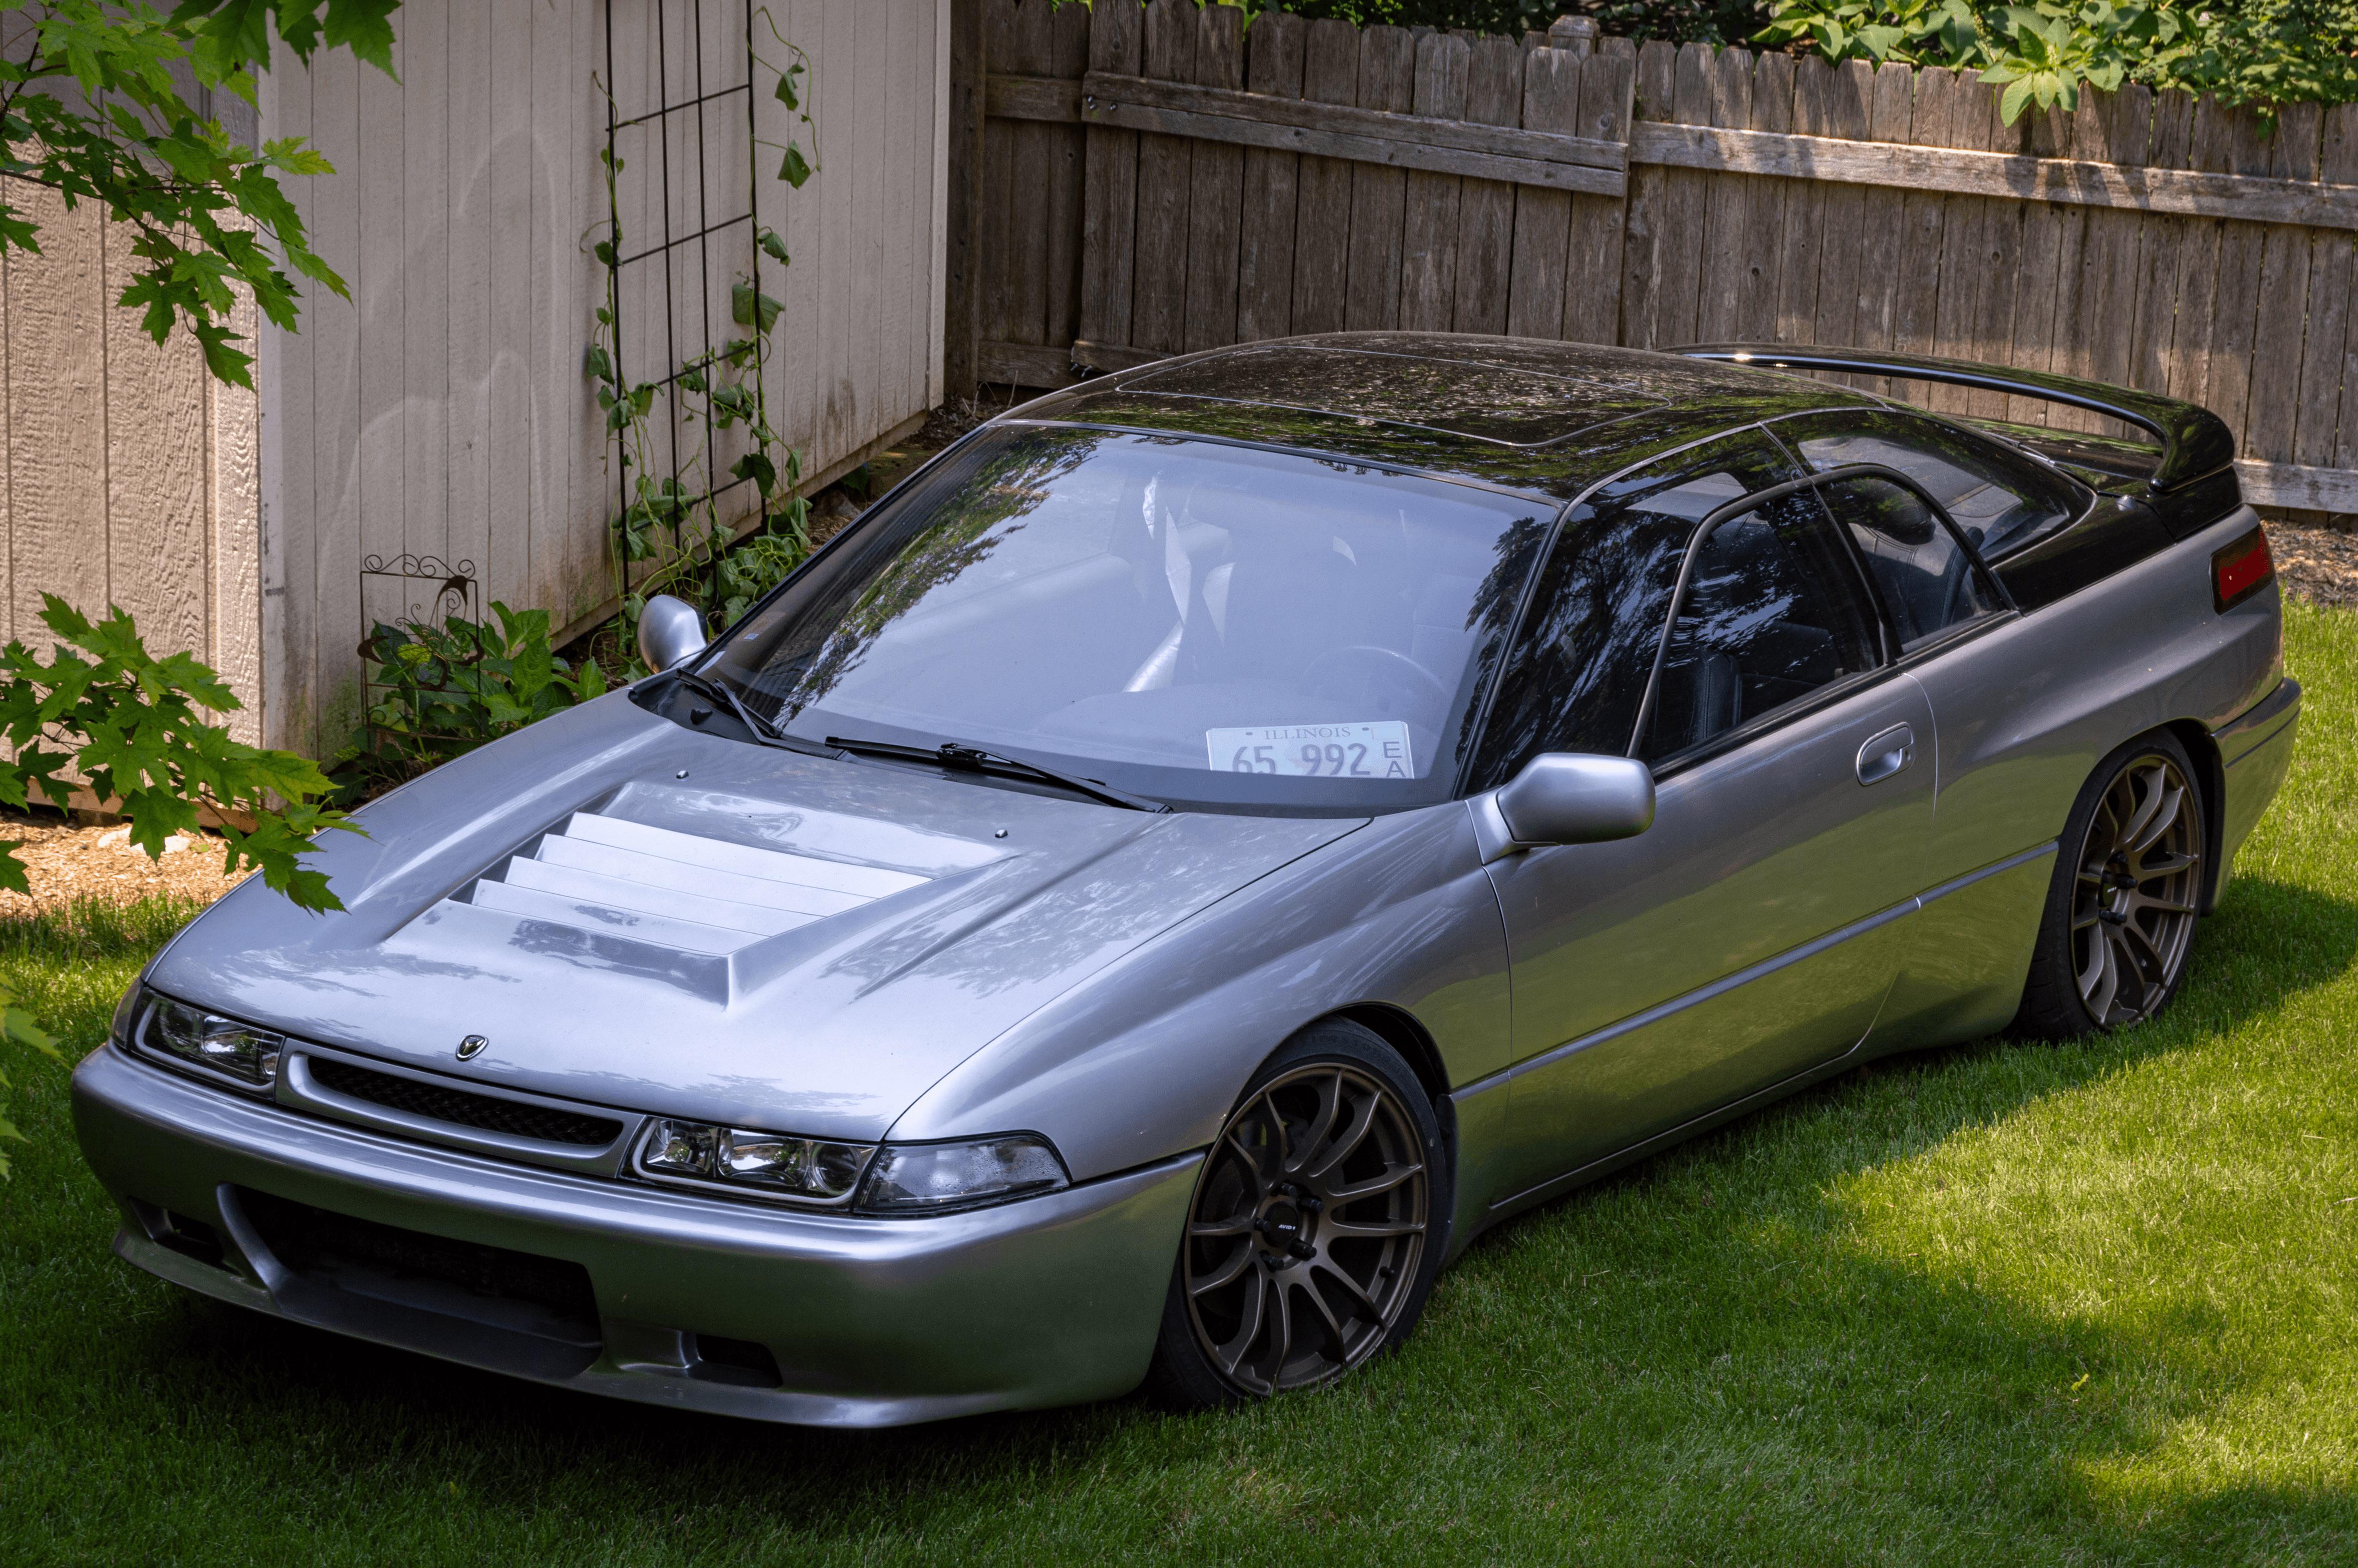 How do we feel about the Subaru SVX? : r/JDM